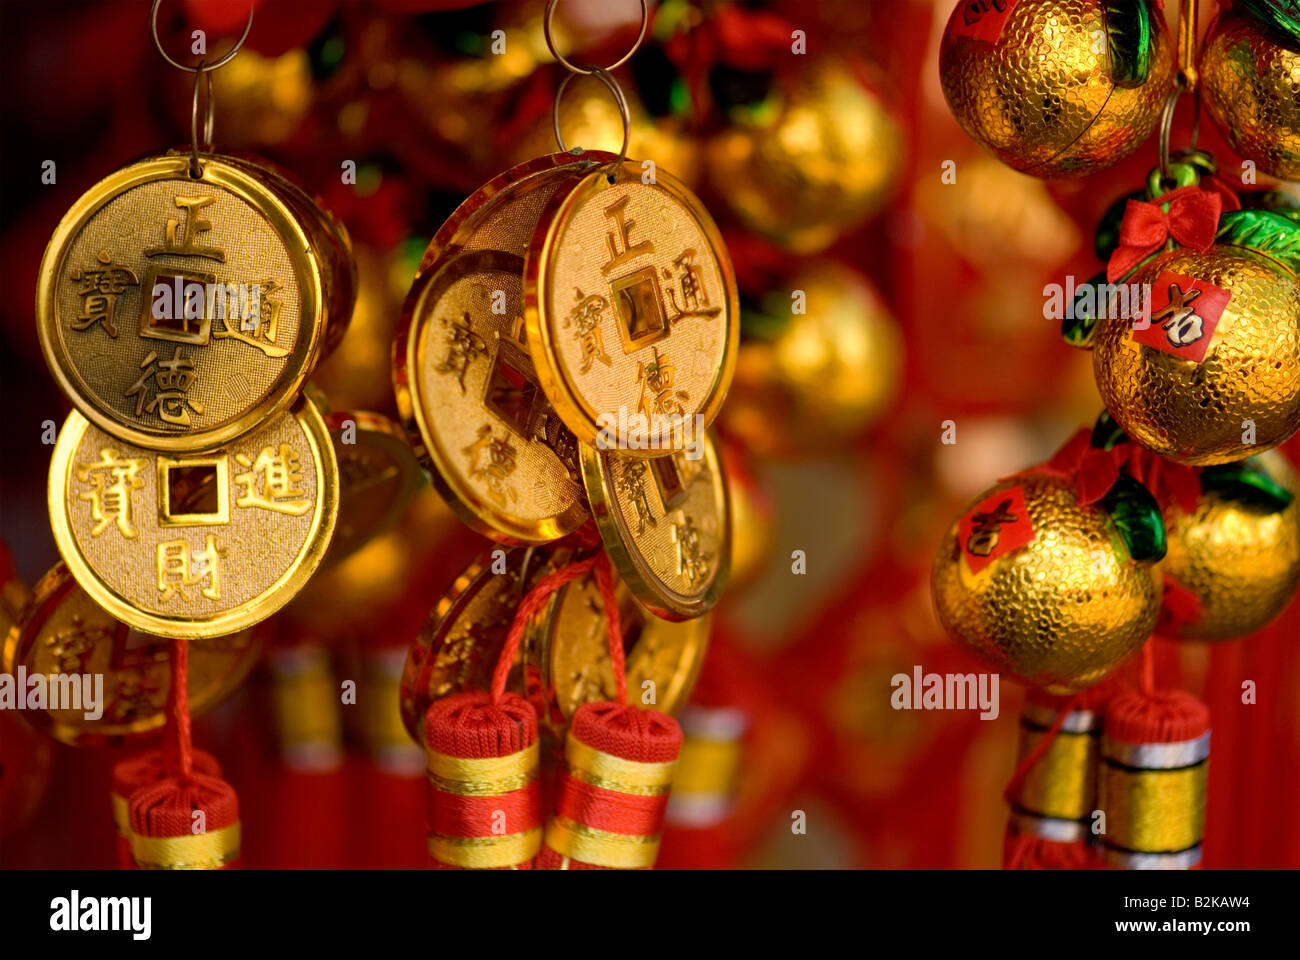 Chinese Trinkets, Good Luck Charms, China Town, Singapore, Red and Gold, Coins Stock Photo